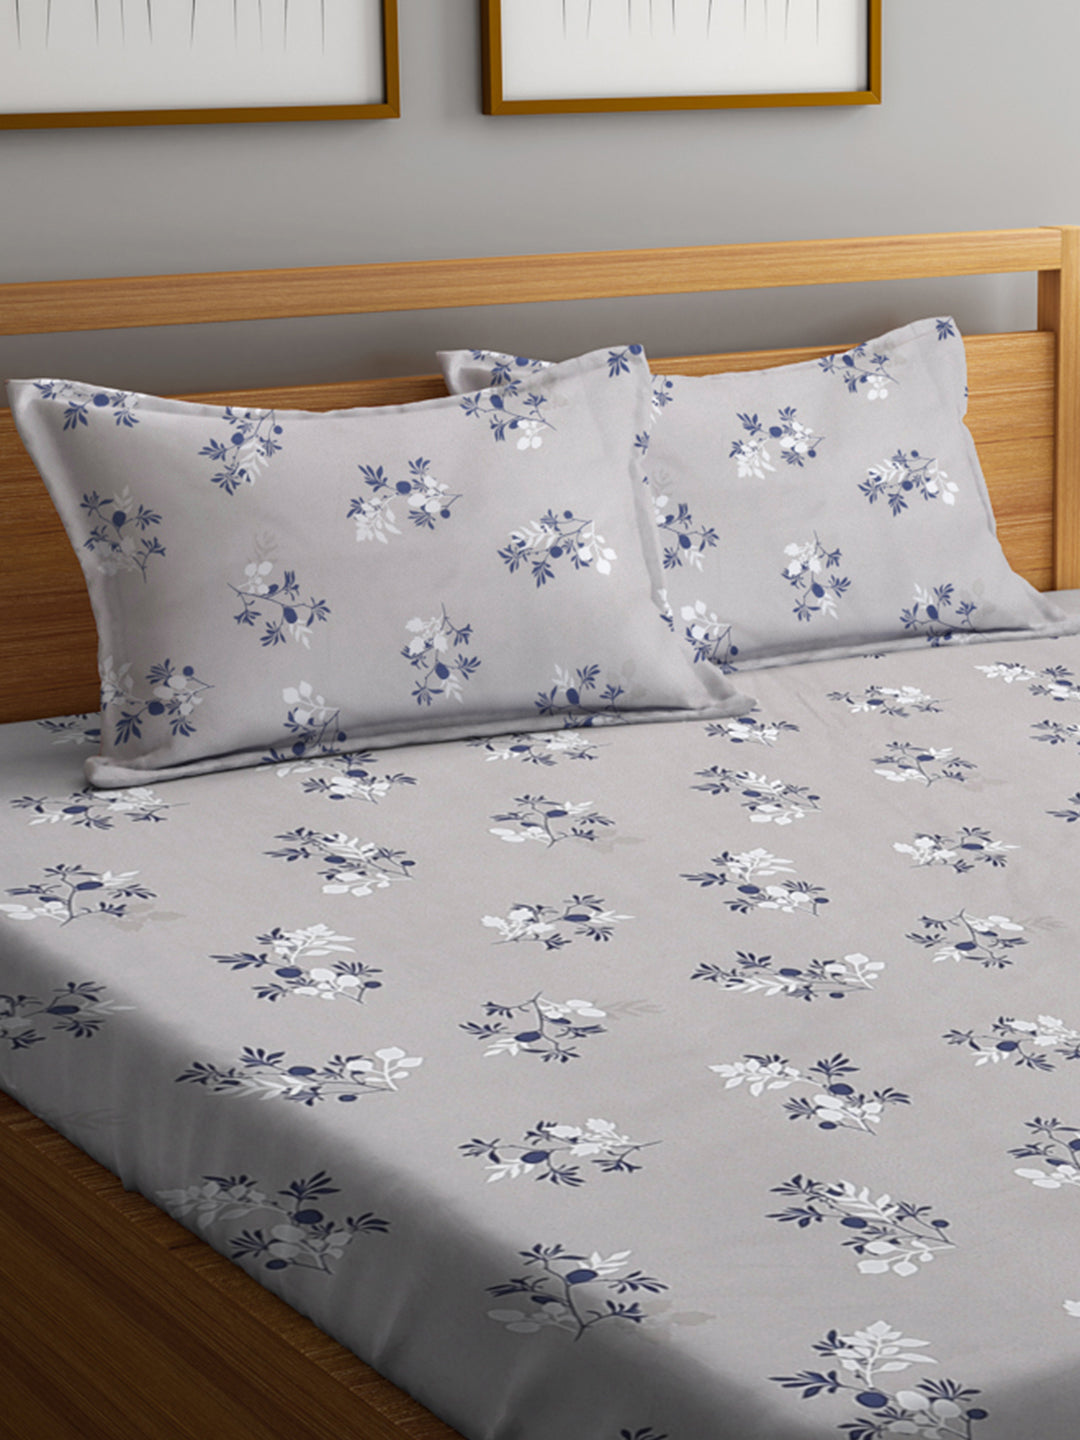 Klotthe Multi Floral 300 TC Cotton Blend Double Bed Sheet with 2 Pillow Covers in Book Fold Packing